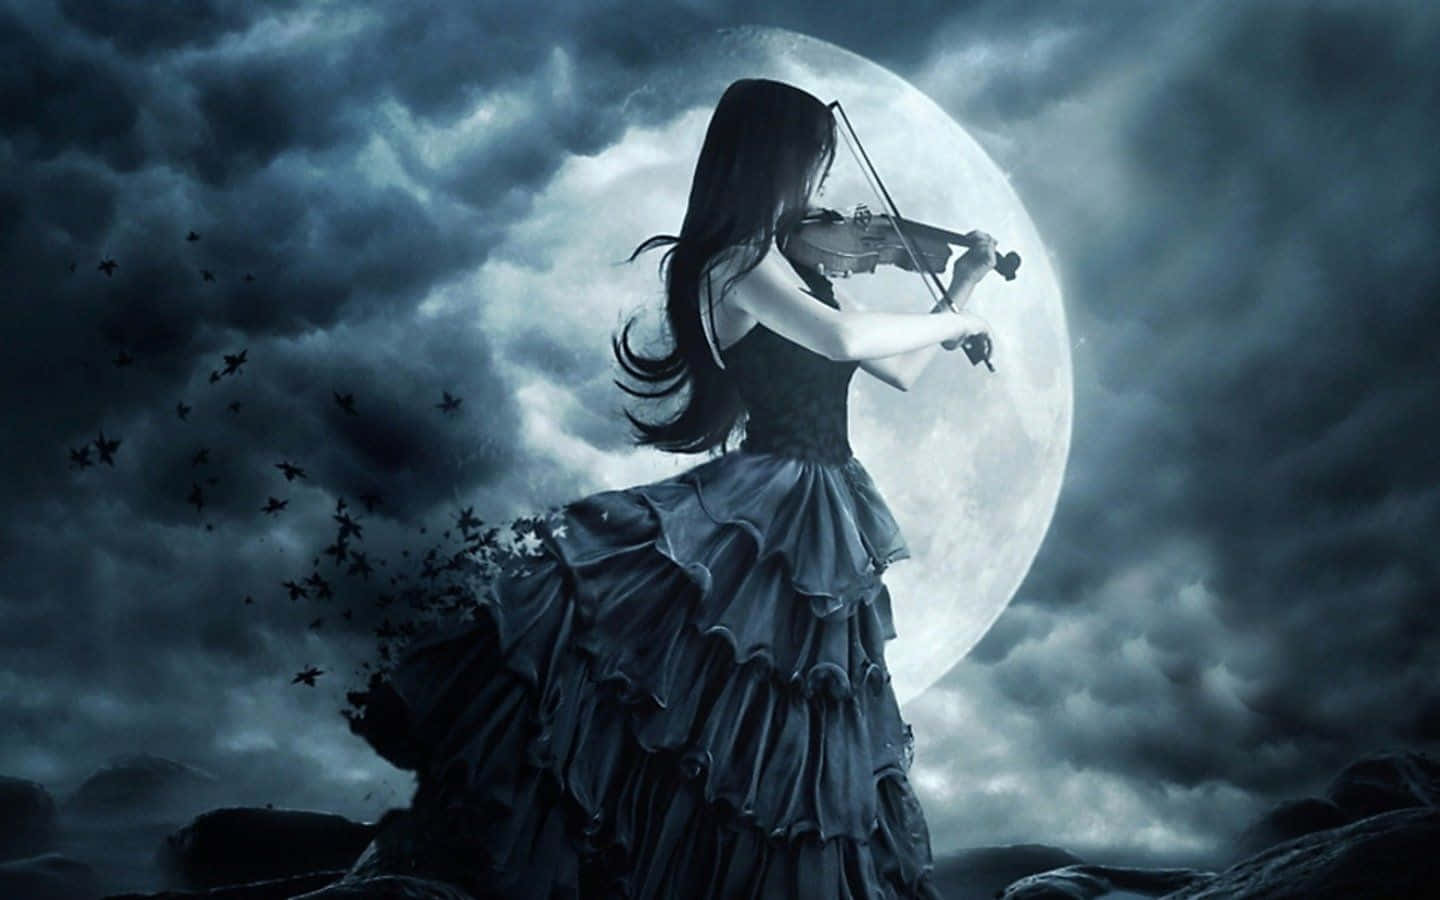 Gothic Computer Girl With Violin Full Moon Wallpaper